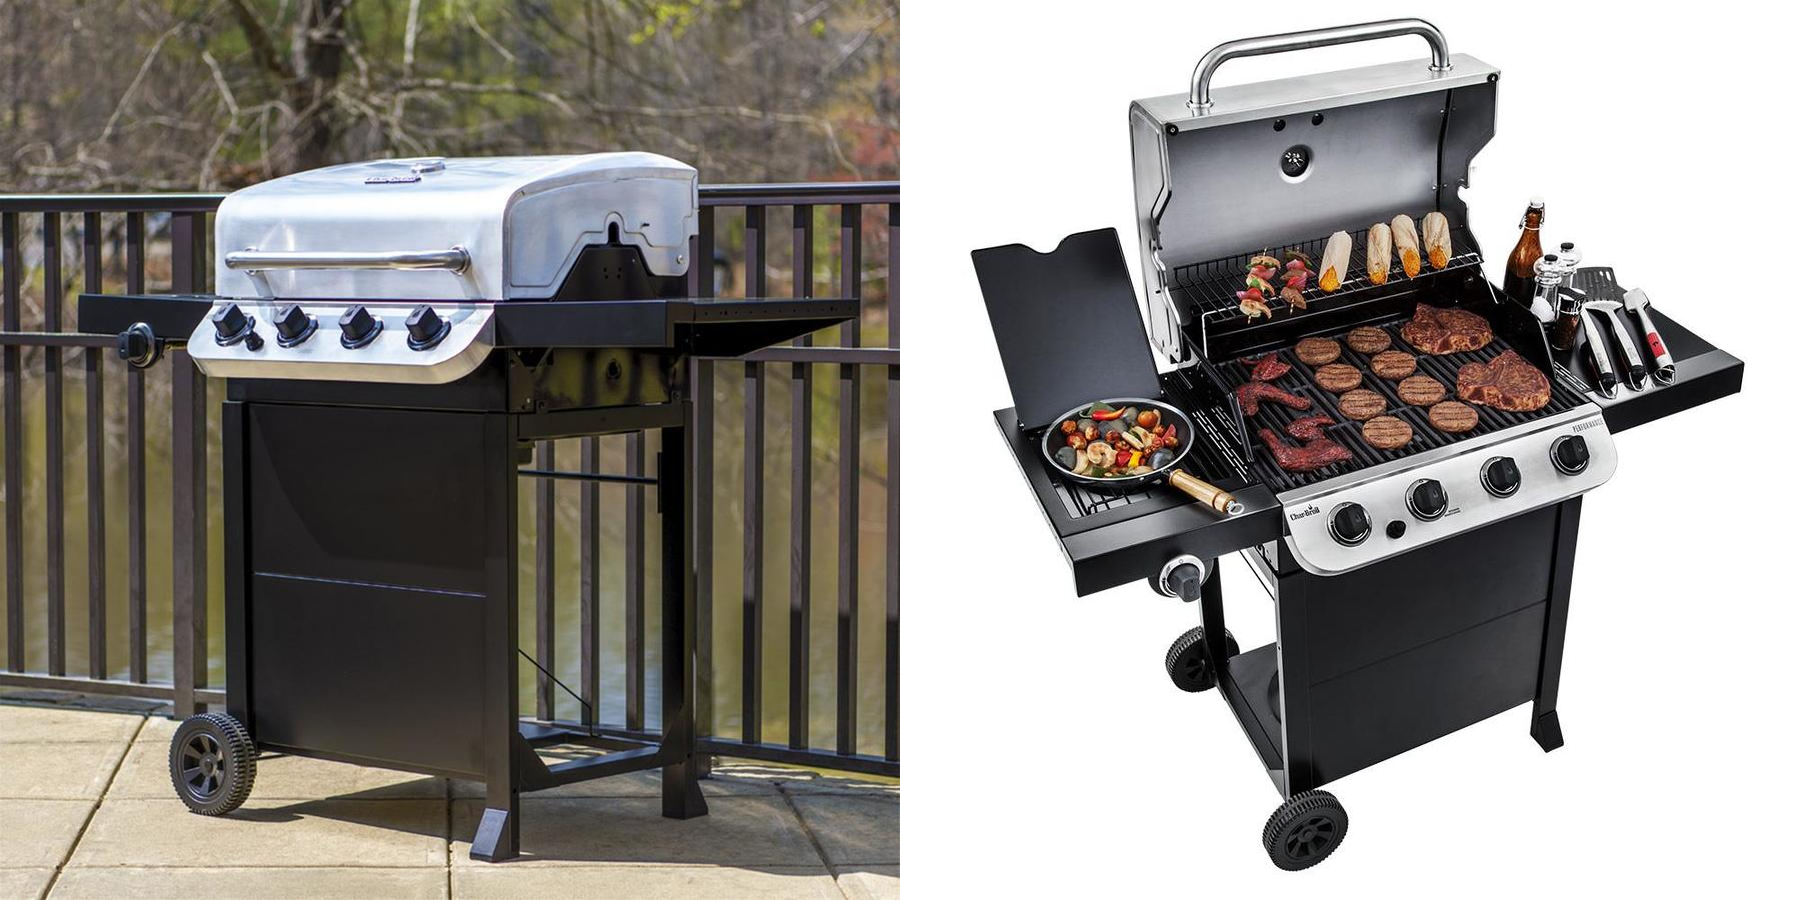 Char-Broil Performance Black and Stainless Steel 4-Burner Propane Grill With Side Burner—$149 + FREE Pickup!